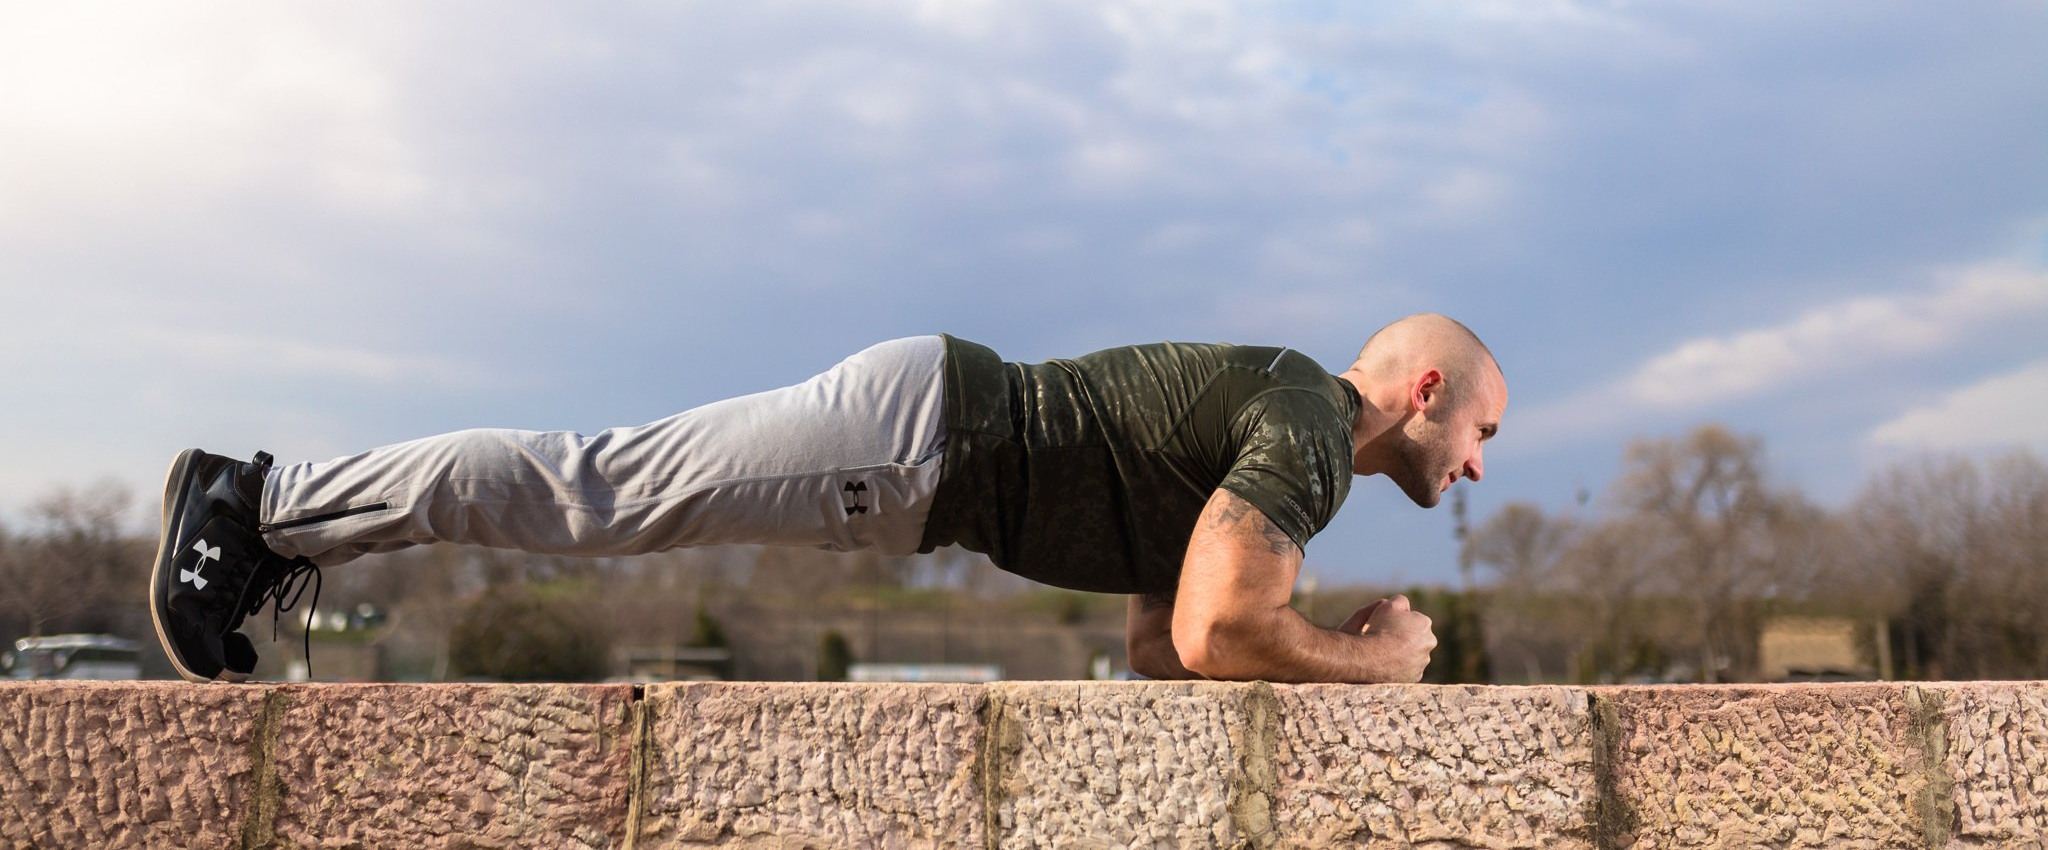 A man in the plank position